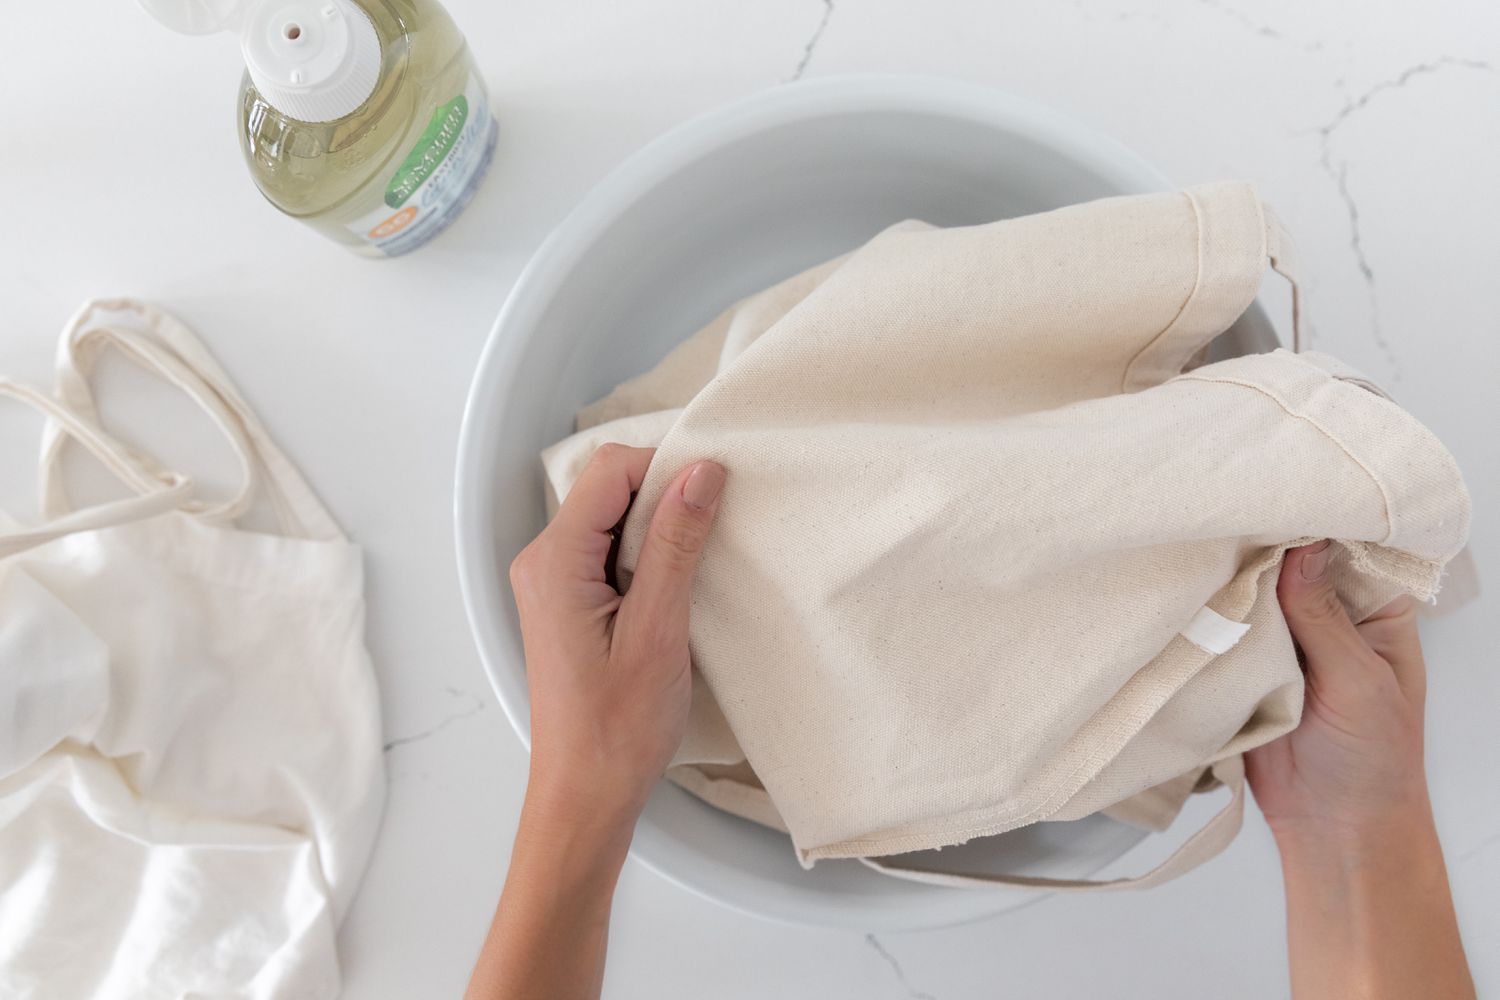 Reusable bag being cleaned inside-out